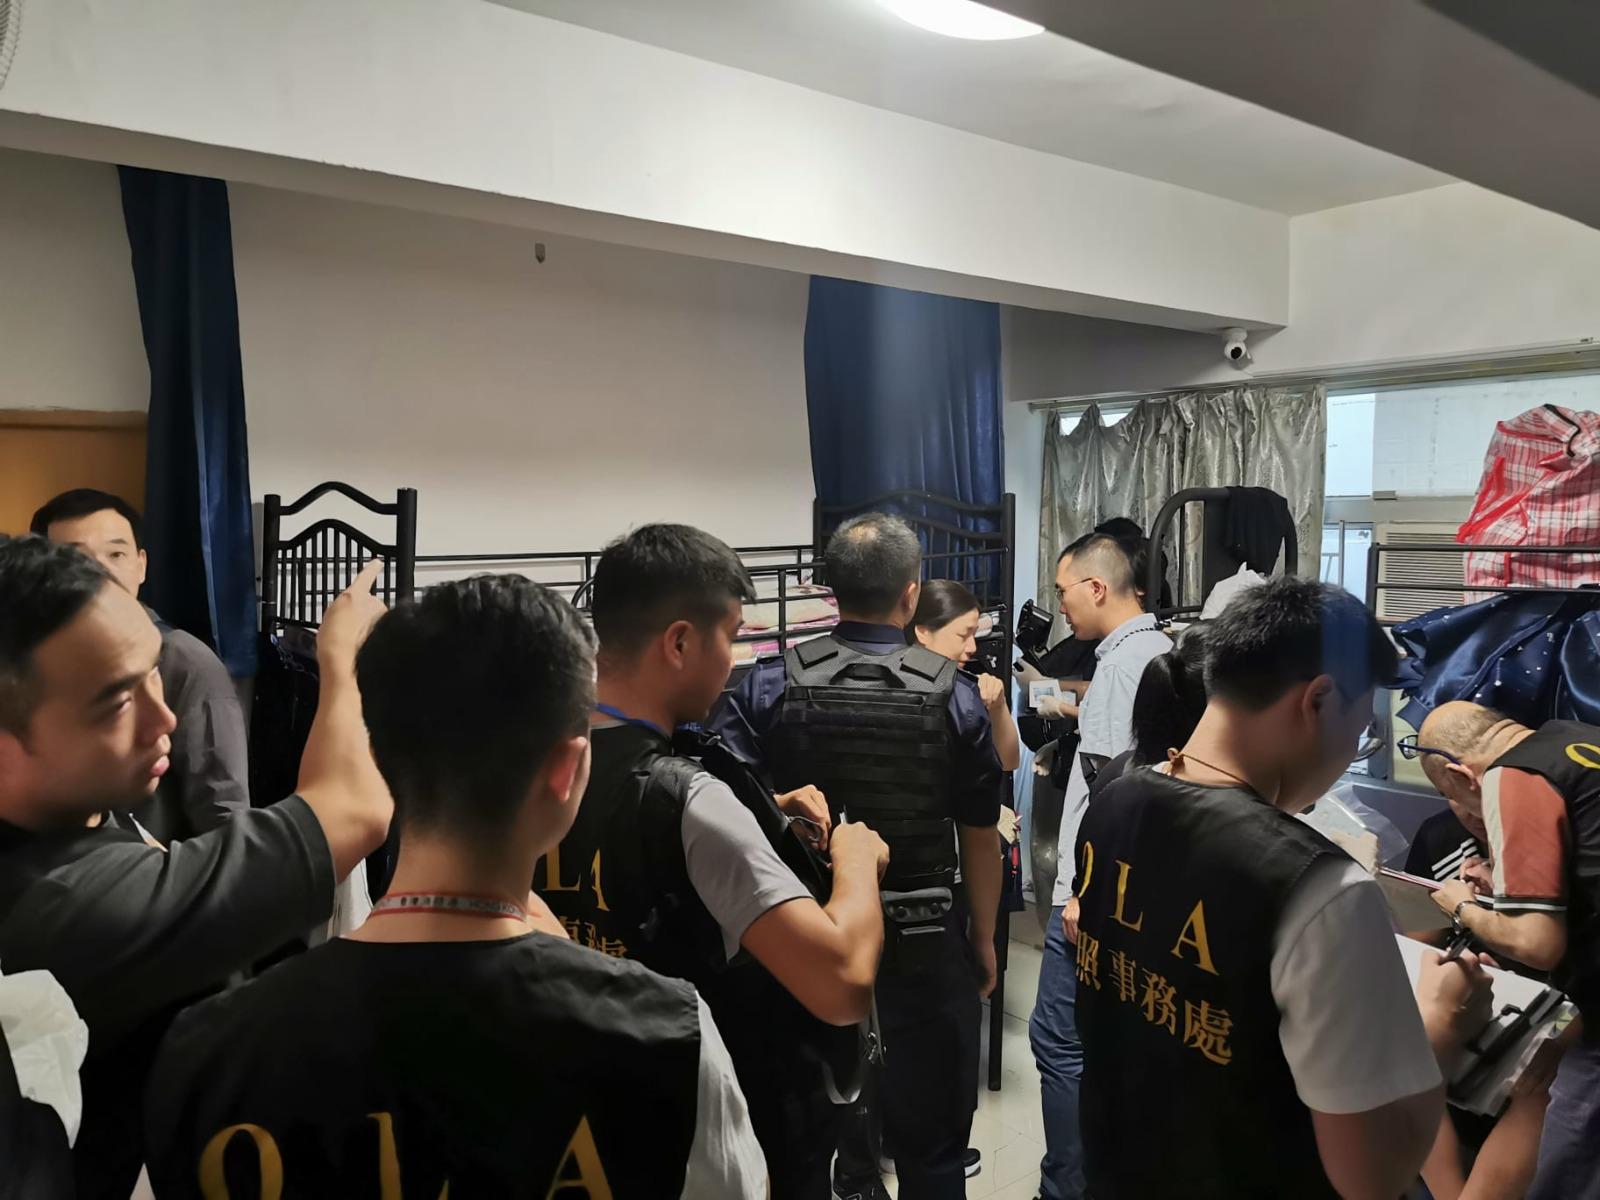 The Office of the Licensing Authority (OLA) of the Home Affairs Department today (October 10) conducted a joint operation with the Immigration Department to inspect premises in Sham Shui Po that was suspected of operating unlicensed bedspace apartment. Photo shows OLA enforcement officers searching for evidence in a suspected unlicensed bedspace apartment.